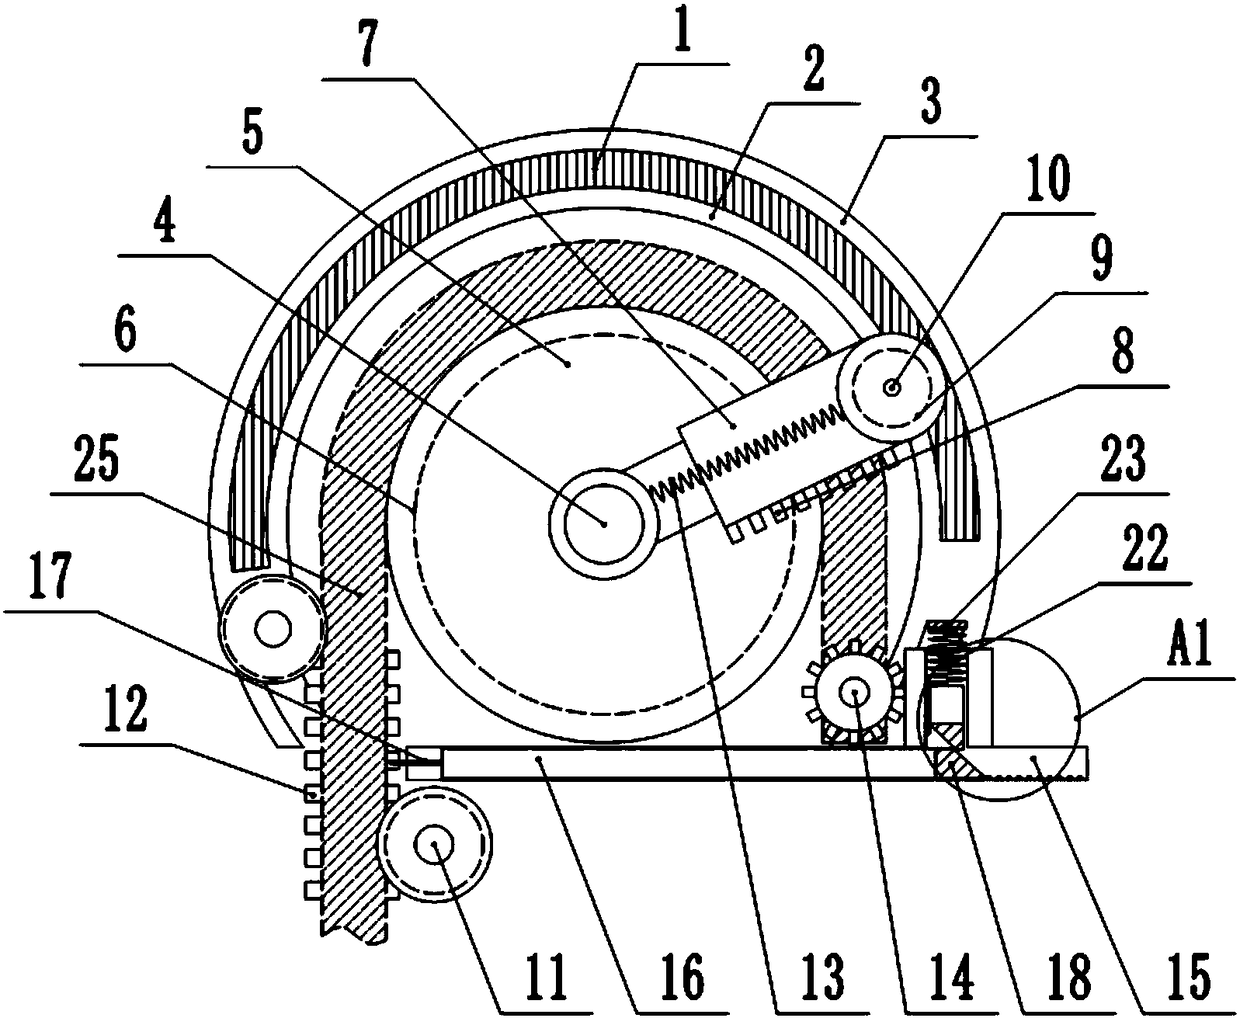 Bent pipe processing device